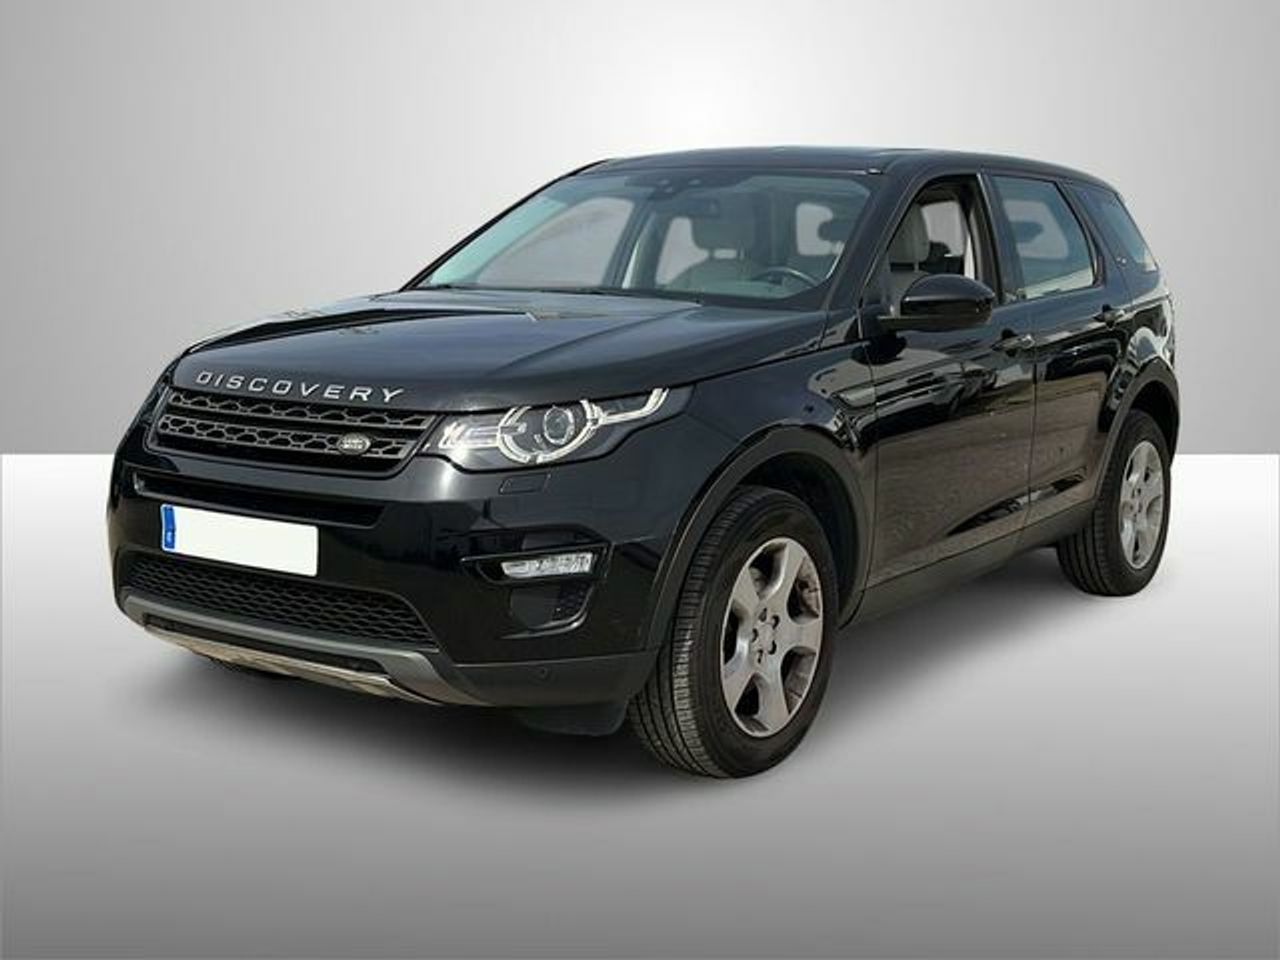 Land-rover discovery sport 2.0l ed4 se 4×2 110 kw (150 cv)